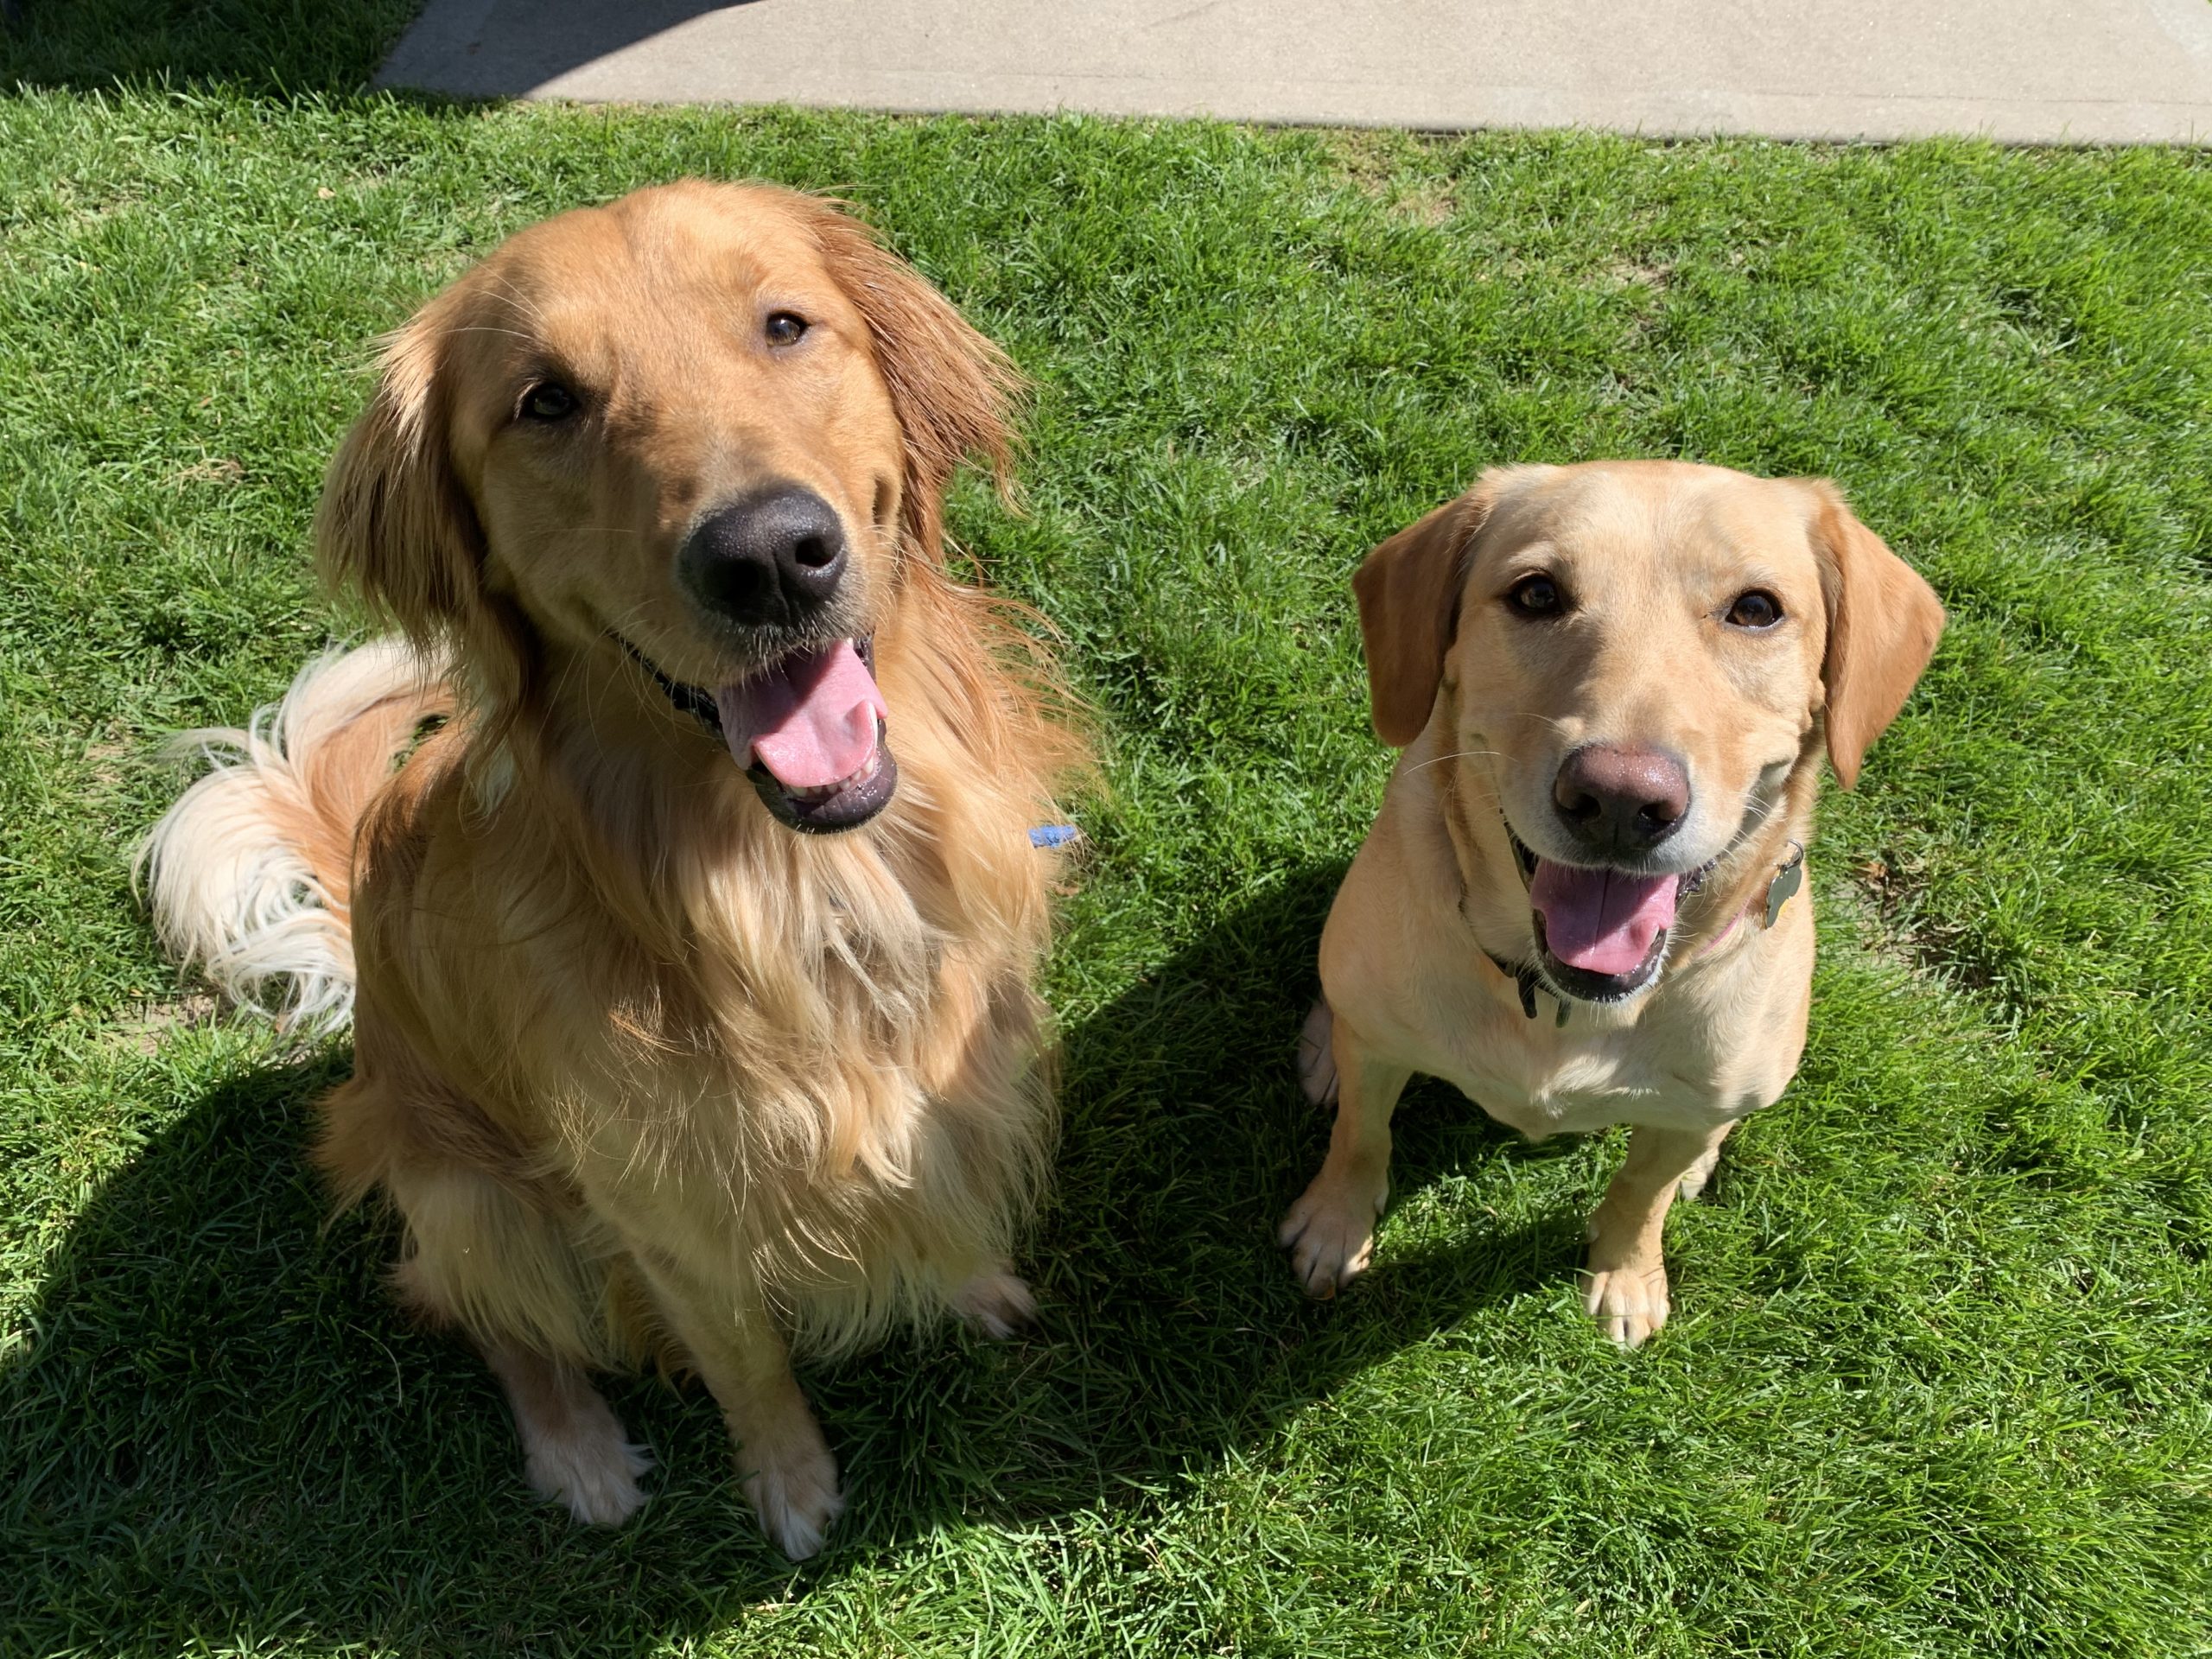 Marley and Dixie scaled - Training a High Energy Lab to Walk Next to People